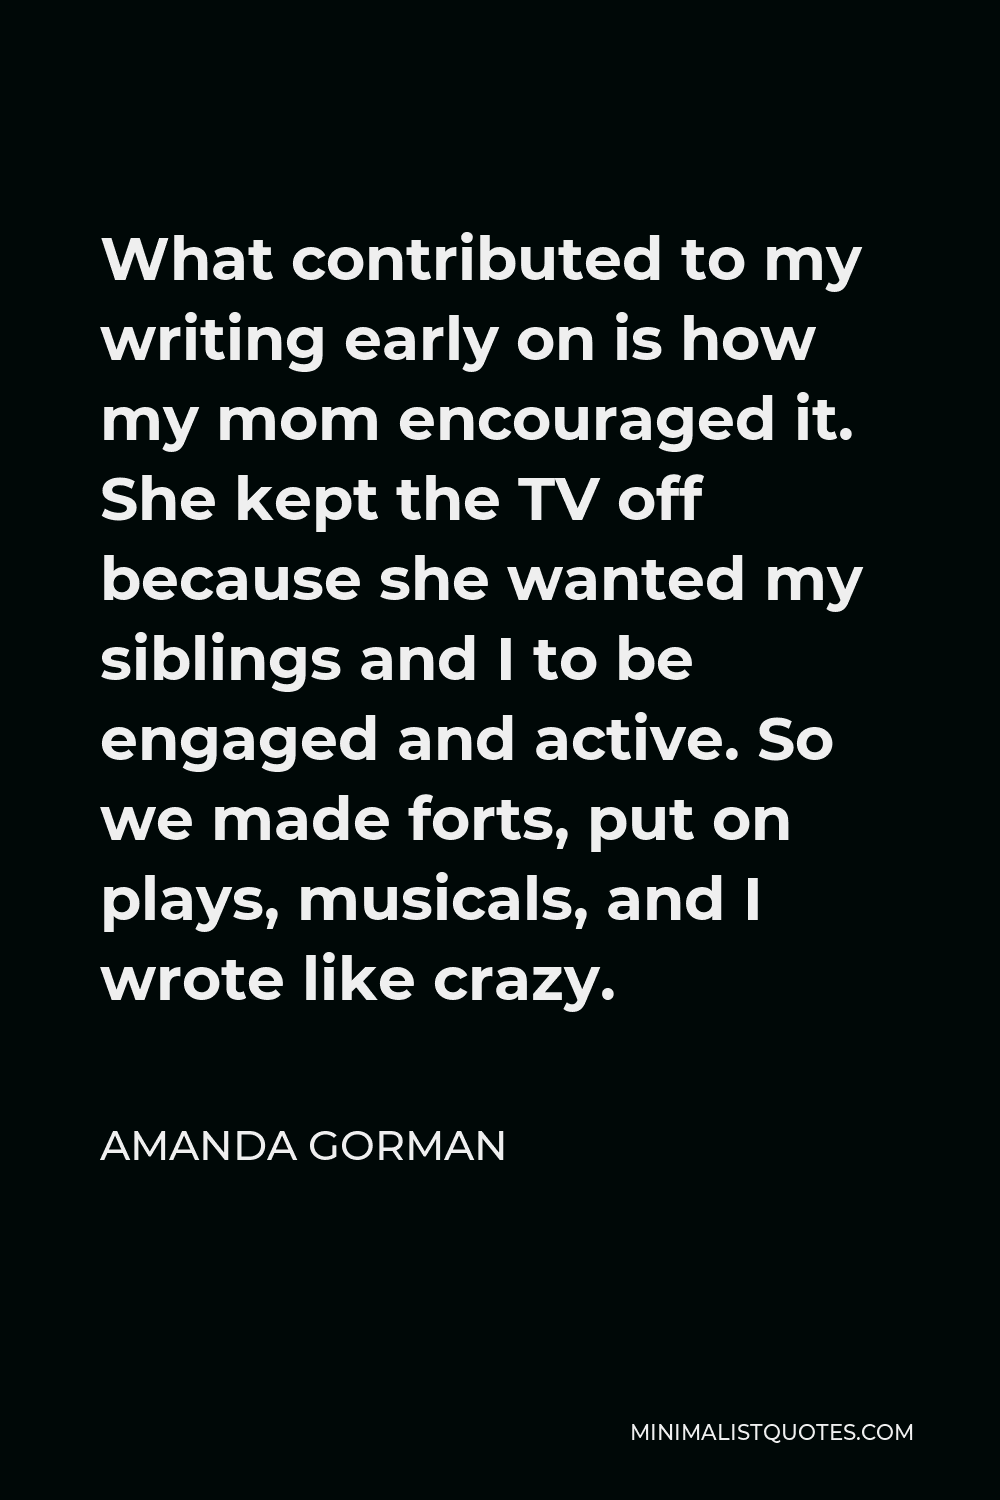 Amanda Gorman Quote - What contributed to my writing early on is how my mom encouraged it. She kept the TV off because she wanted my siblings and I to be engaged and active. So we made forts, put on plays, musicals, and I wrote like crazy.